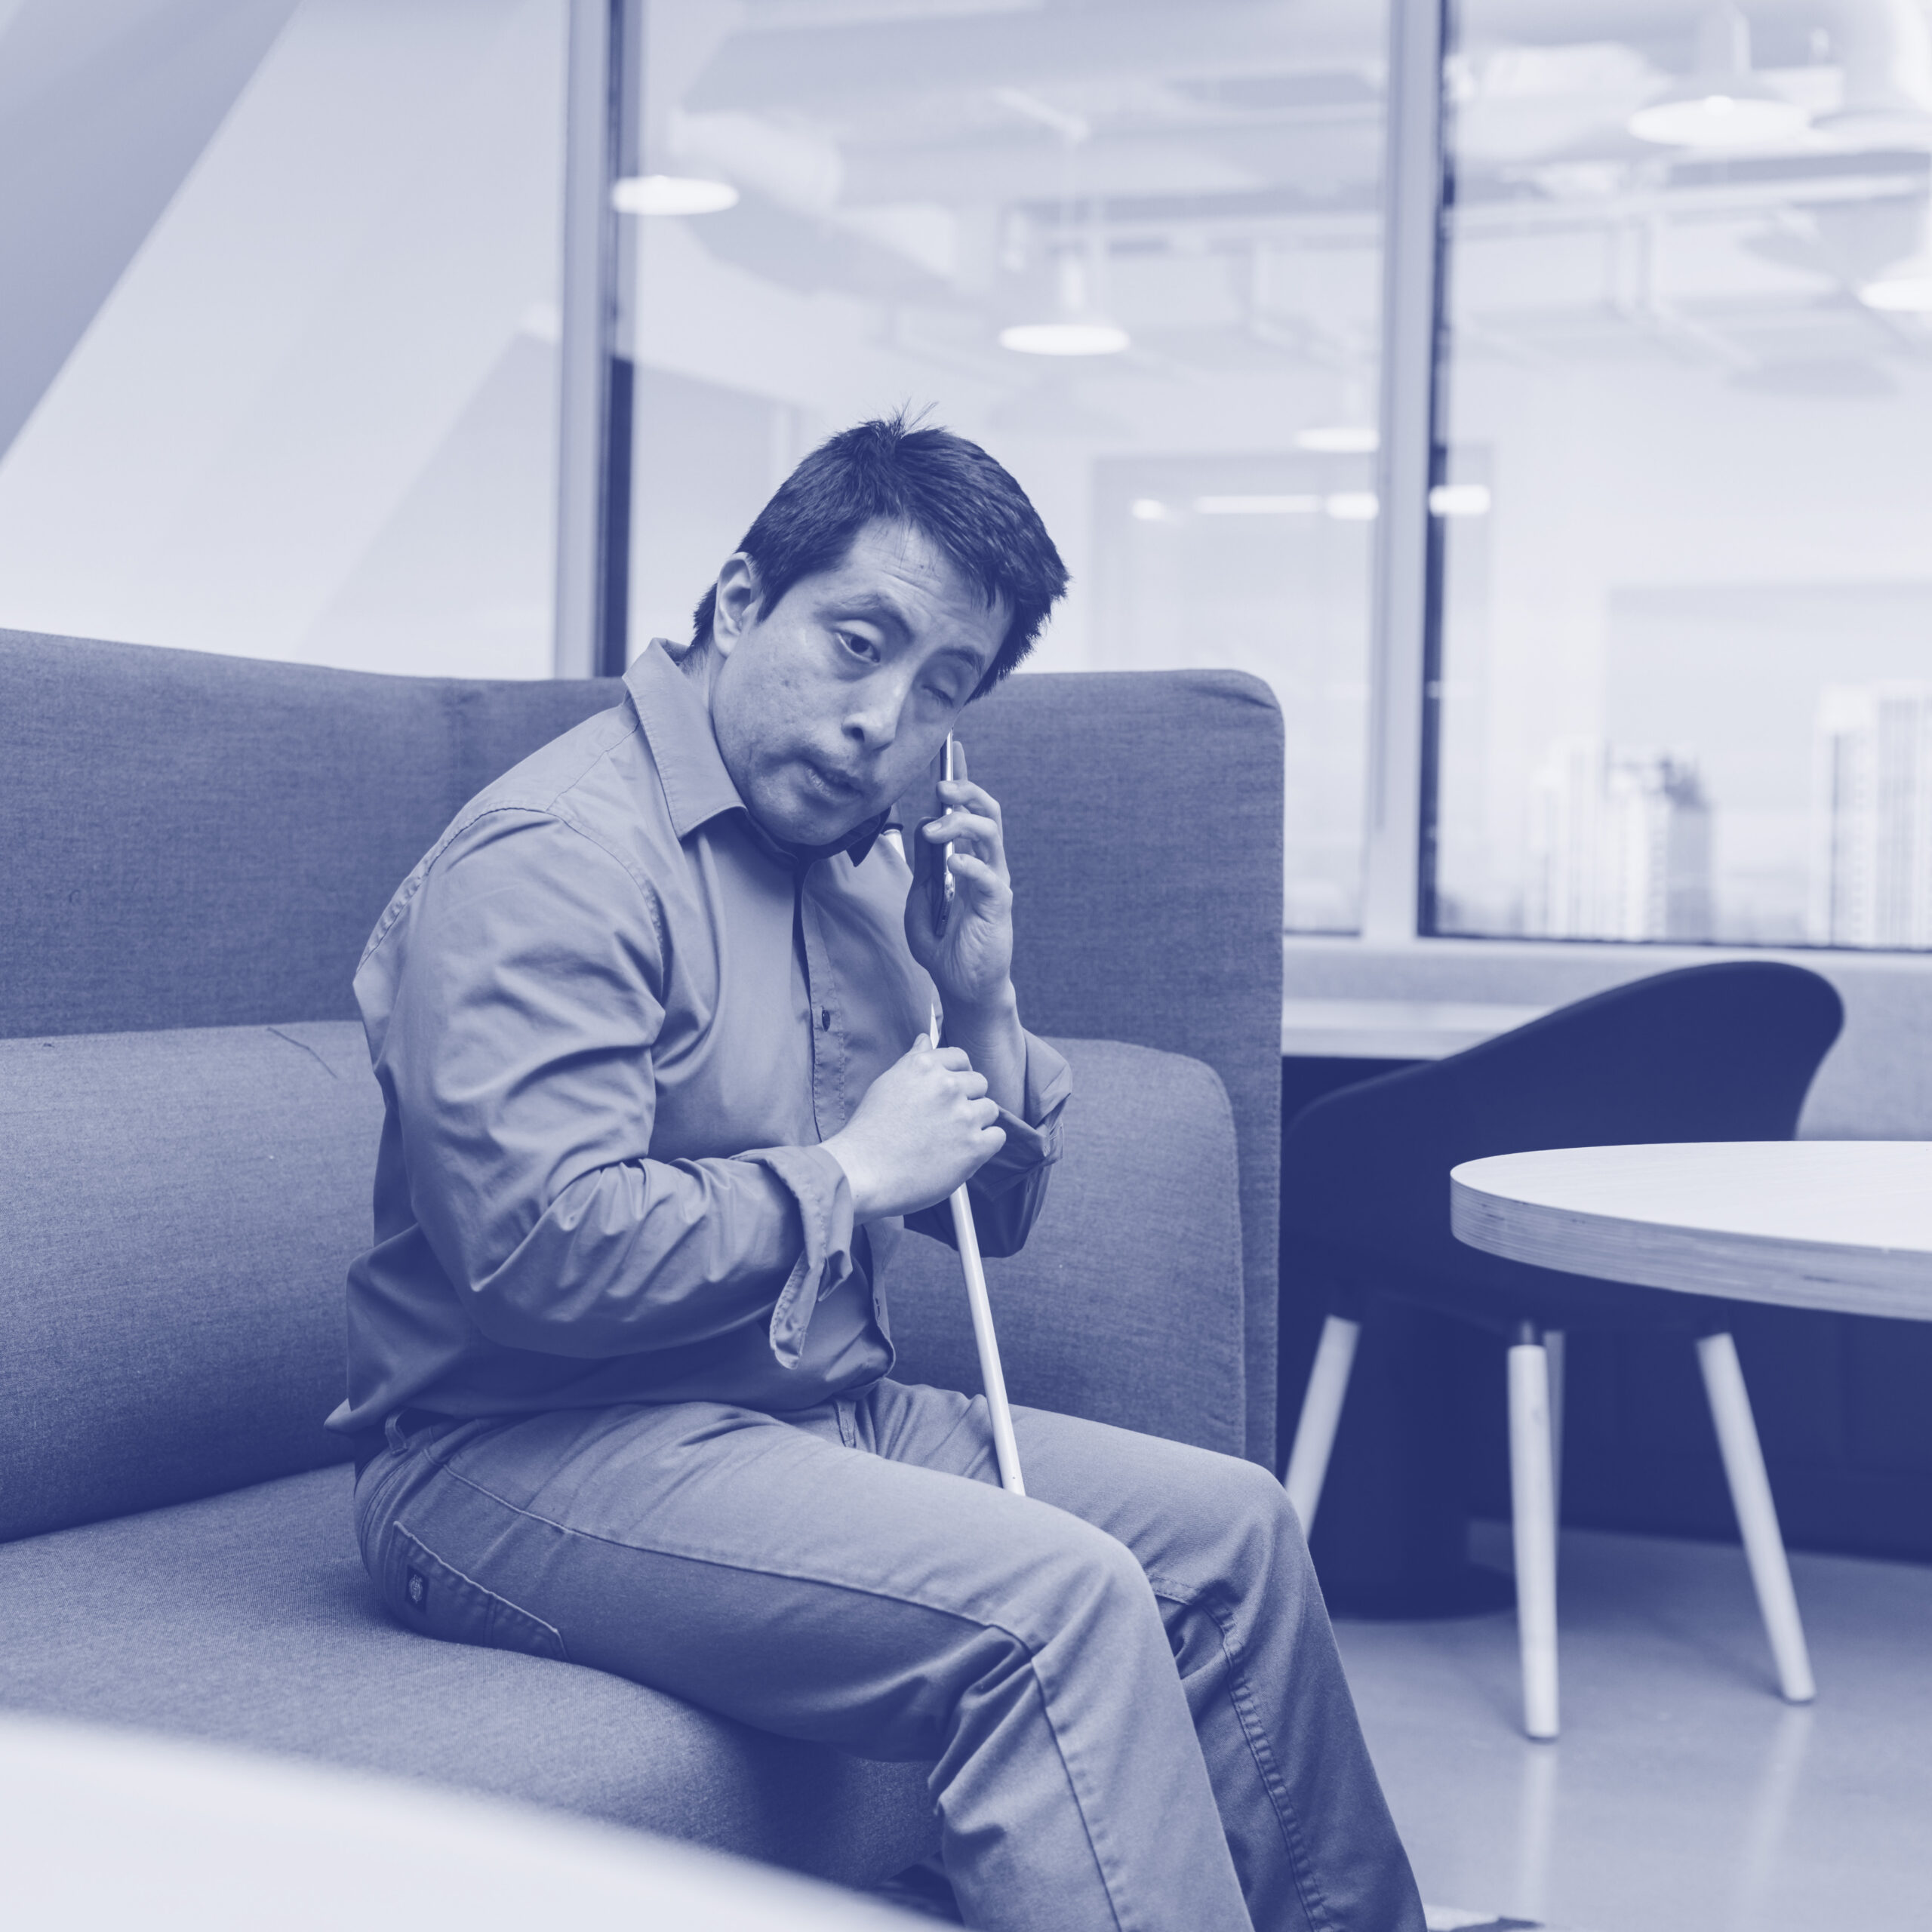 Israel, a Blind man, listens to his phone at a corporate office booth.